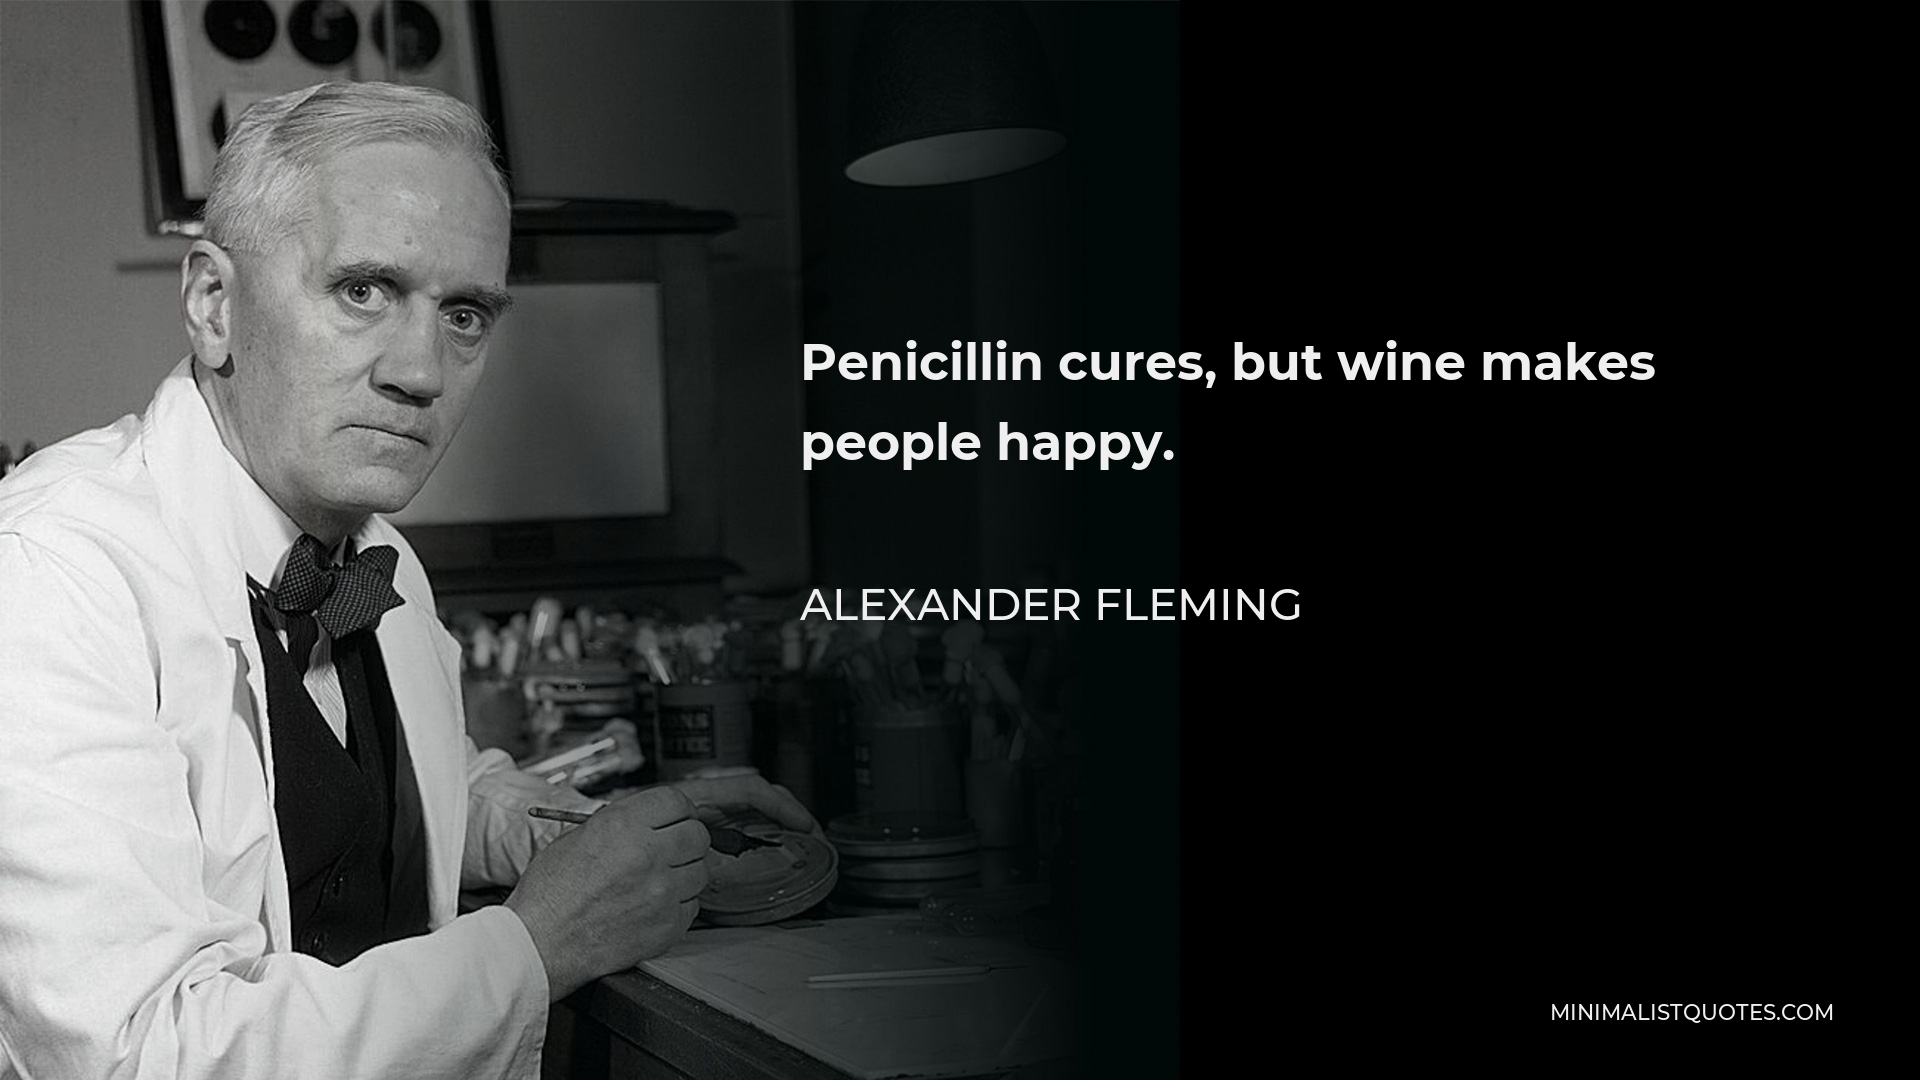 Alexander Fleming Quote - Penicillin cures, but wine makes people happy.